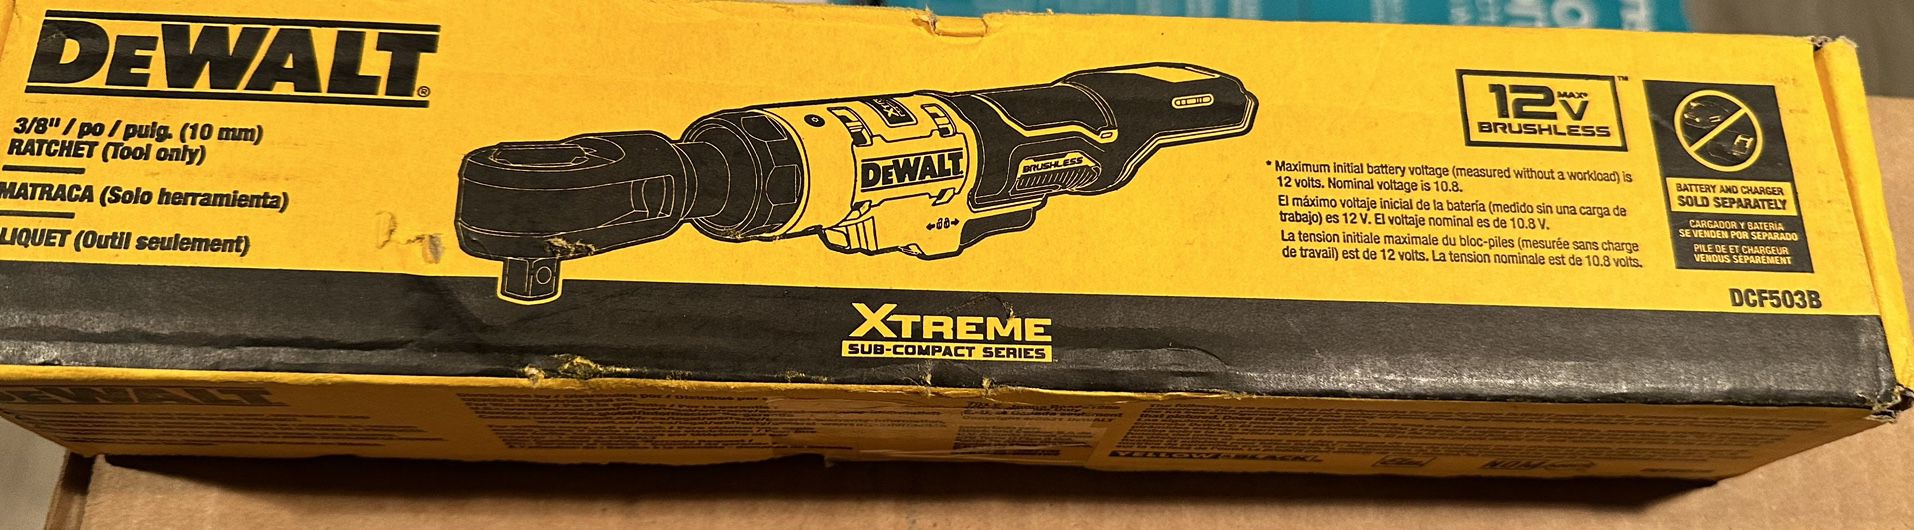 DEWALT XTREME 12-volt Max Variable Speed Brushless 3/8-in Drive Cordless Ratchet Wrench (Bare Tool)